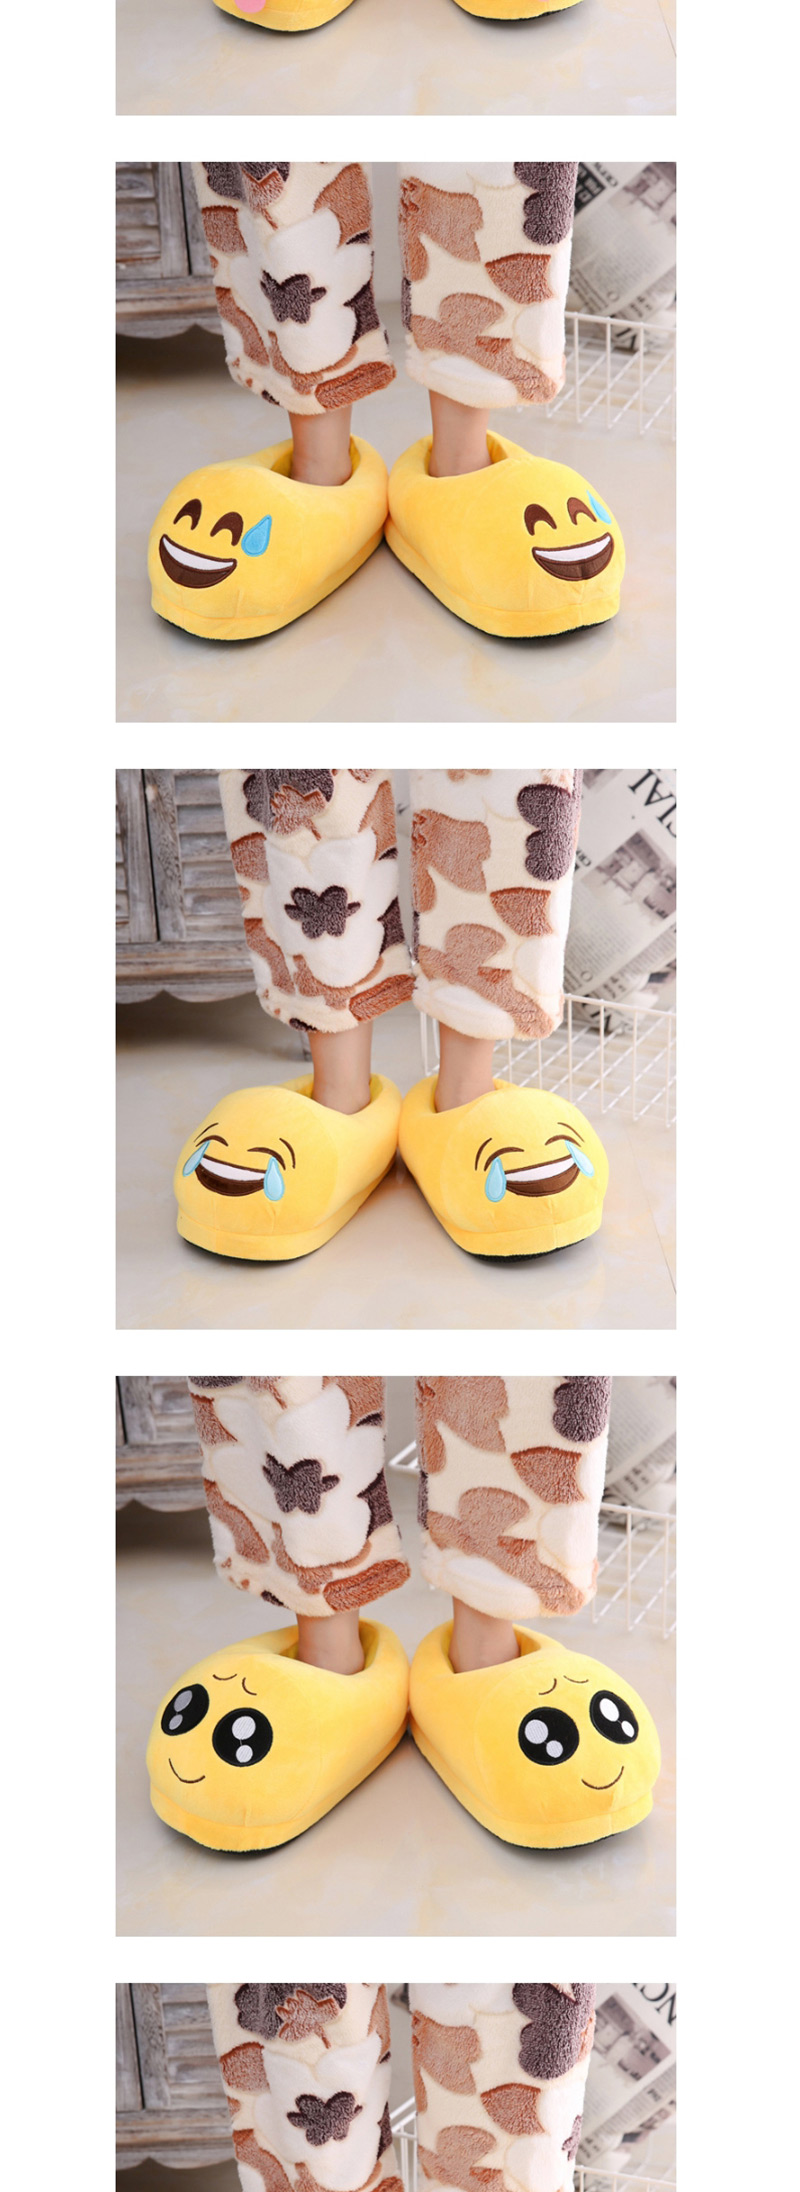 Fashion 11 Yellow Sweat Cartoon Expression Plush Bag With Cotton Slippers,Slippers